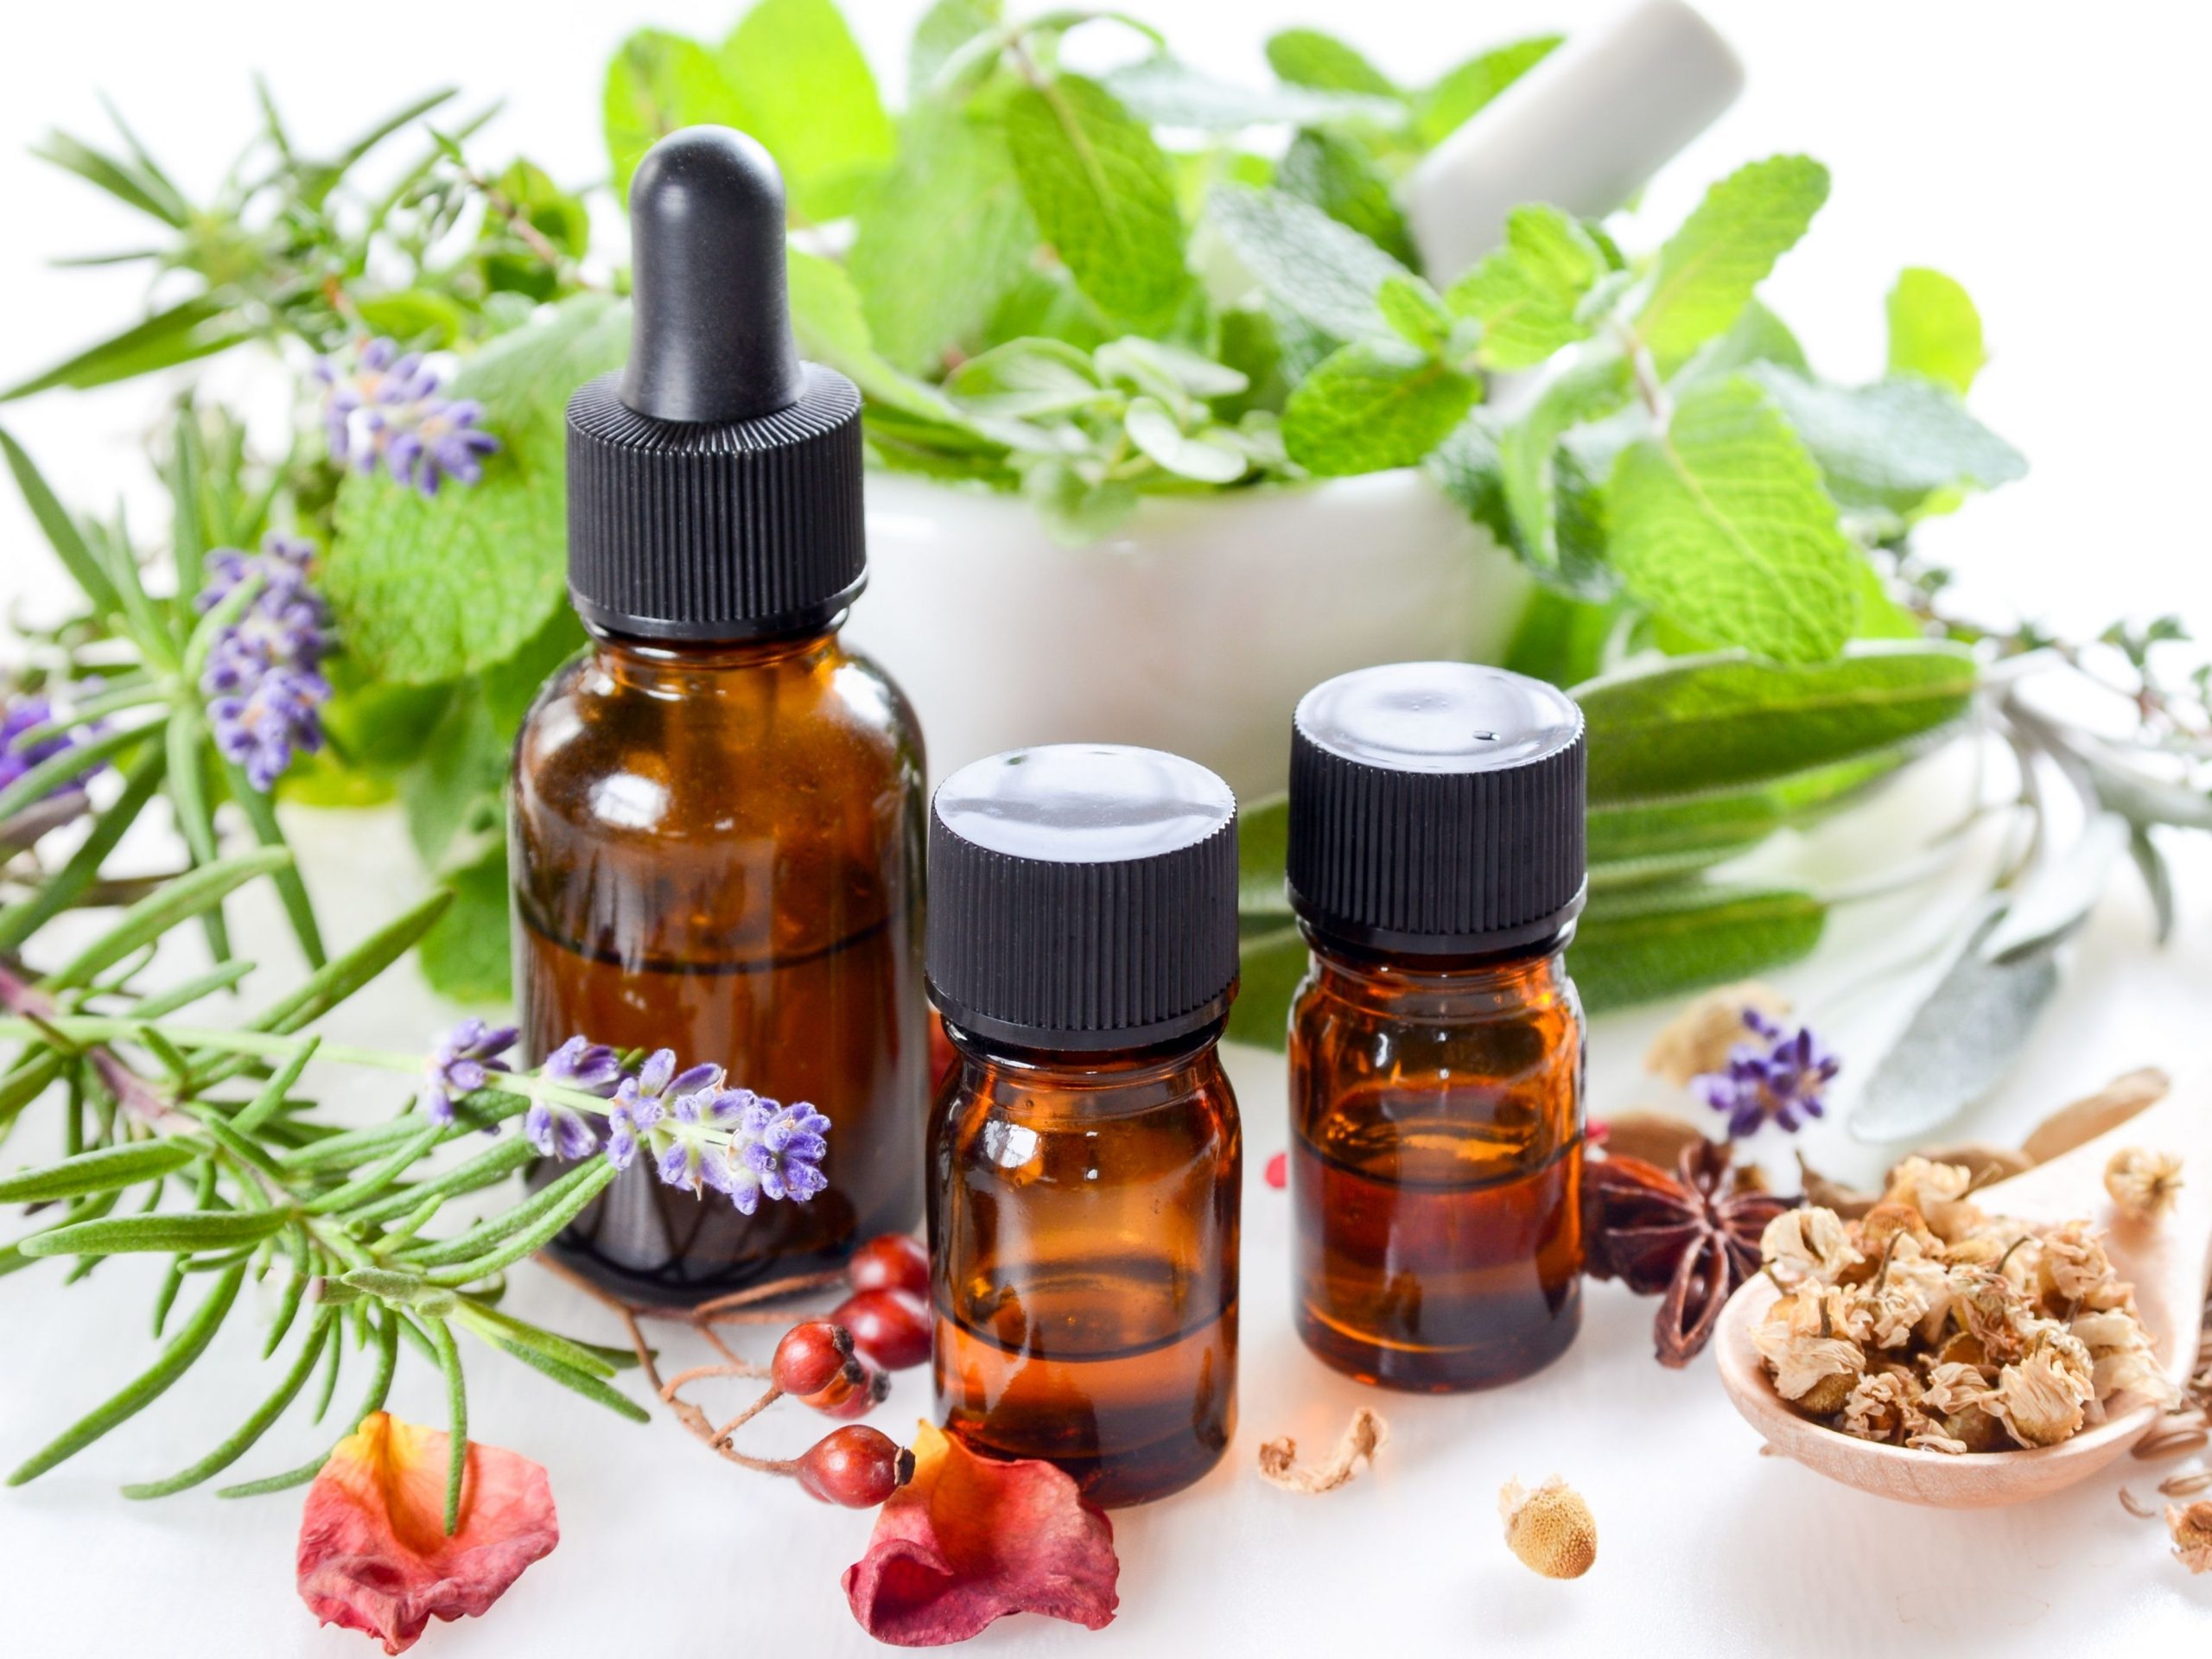 What are the best aromatherapy massage oils and benefits?